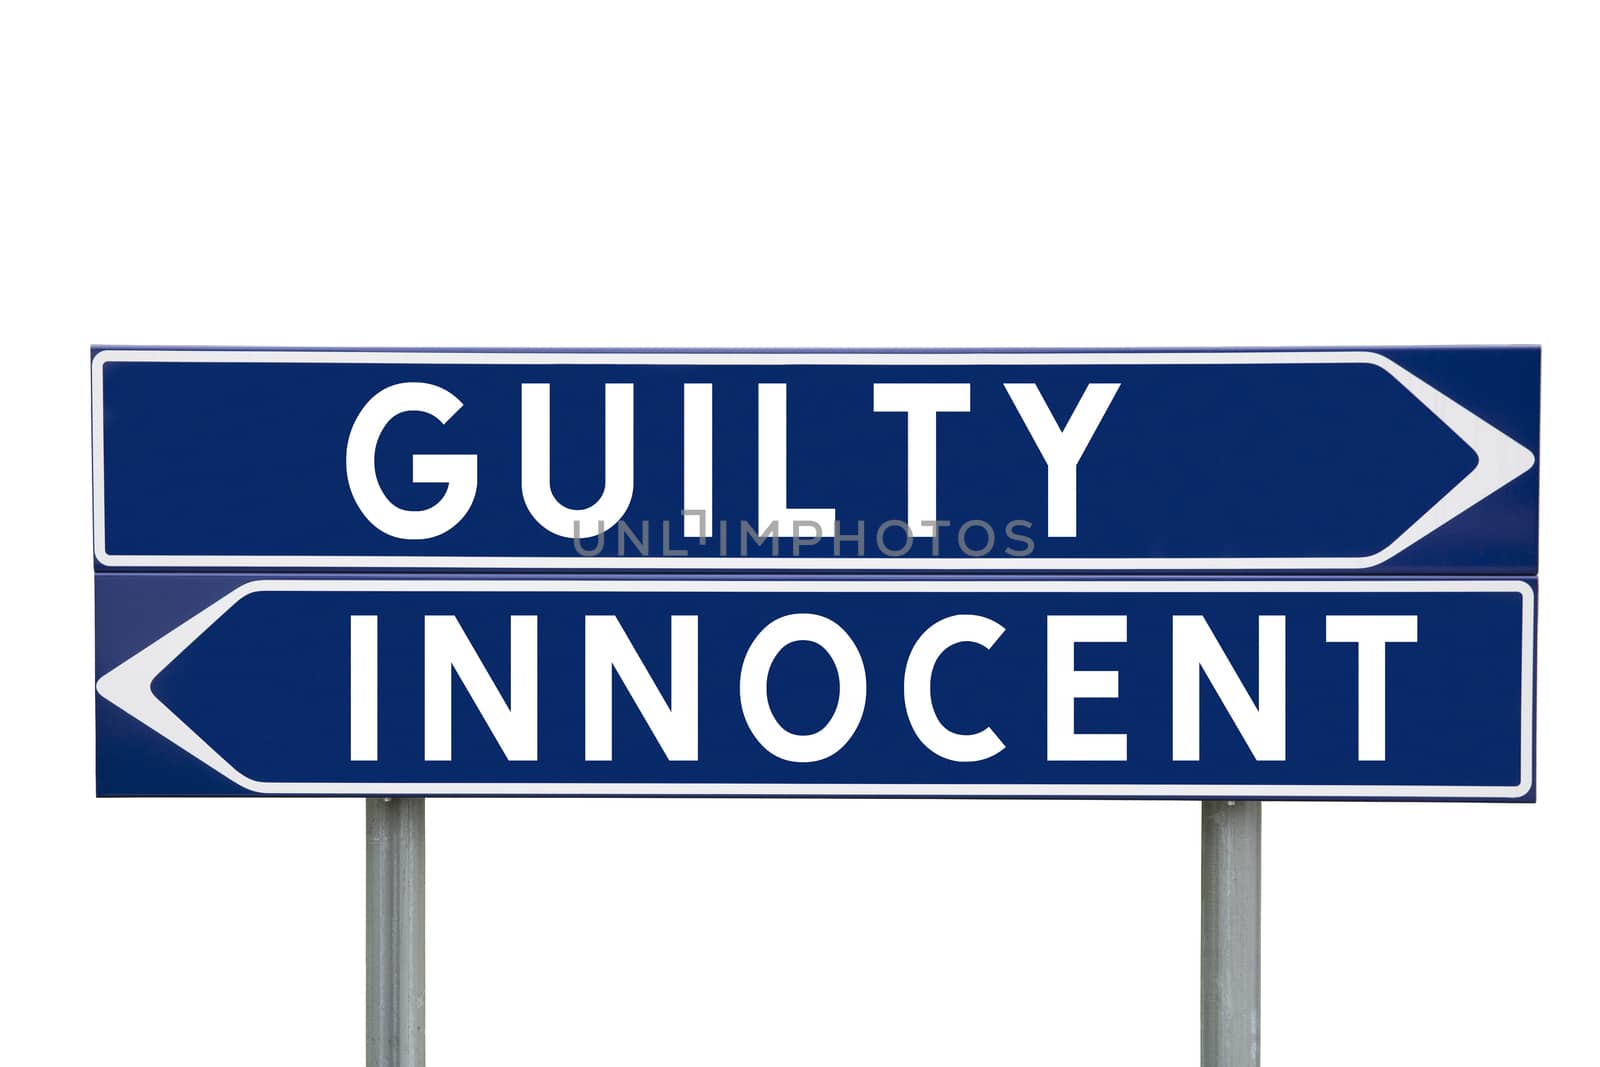 Blue Direction Signs with choice between Guilty or Innocent isolated on white background